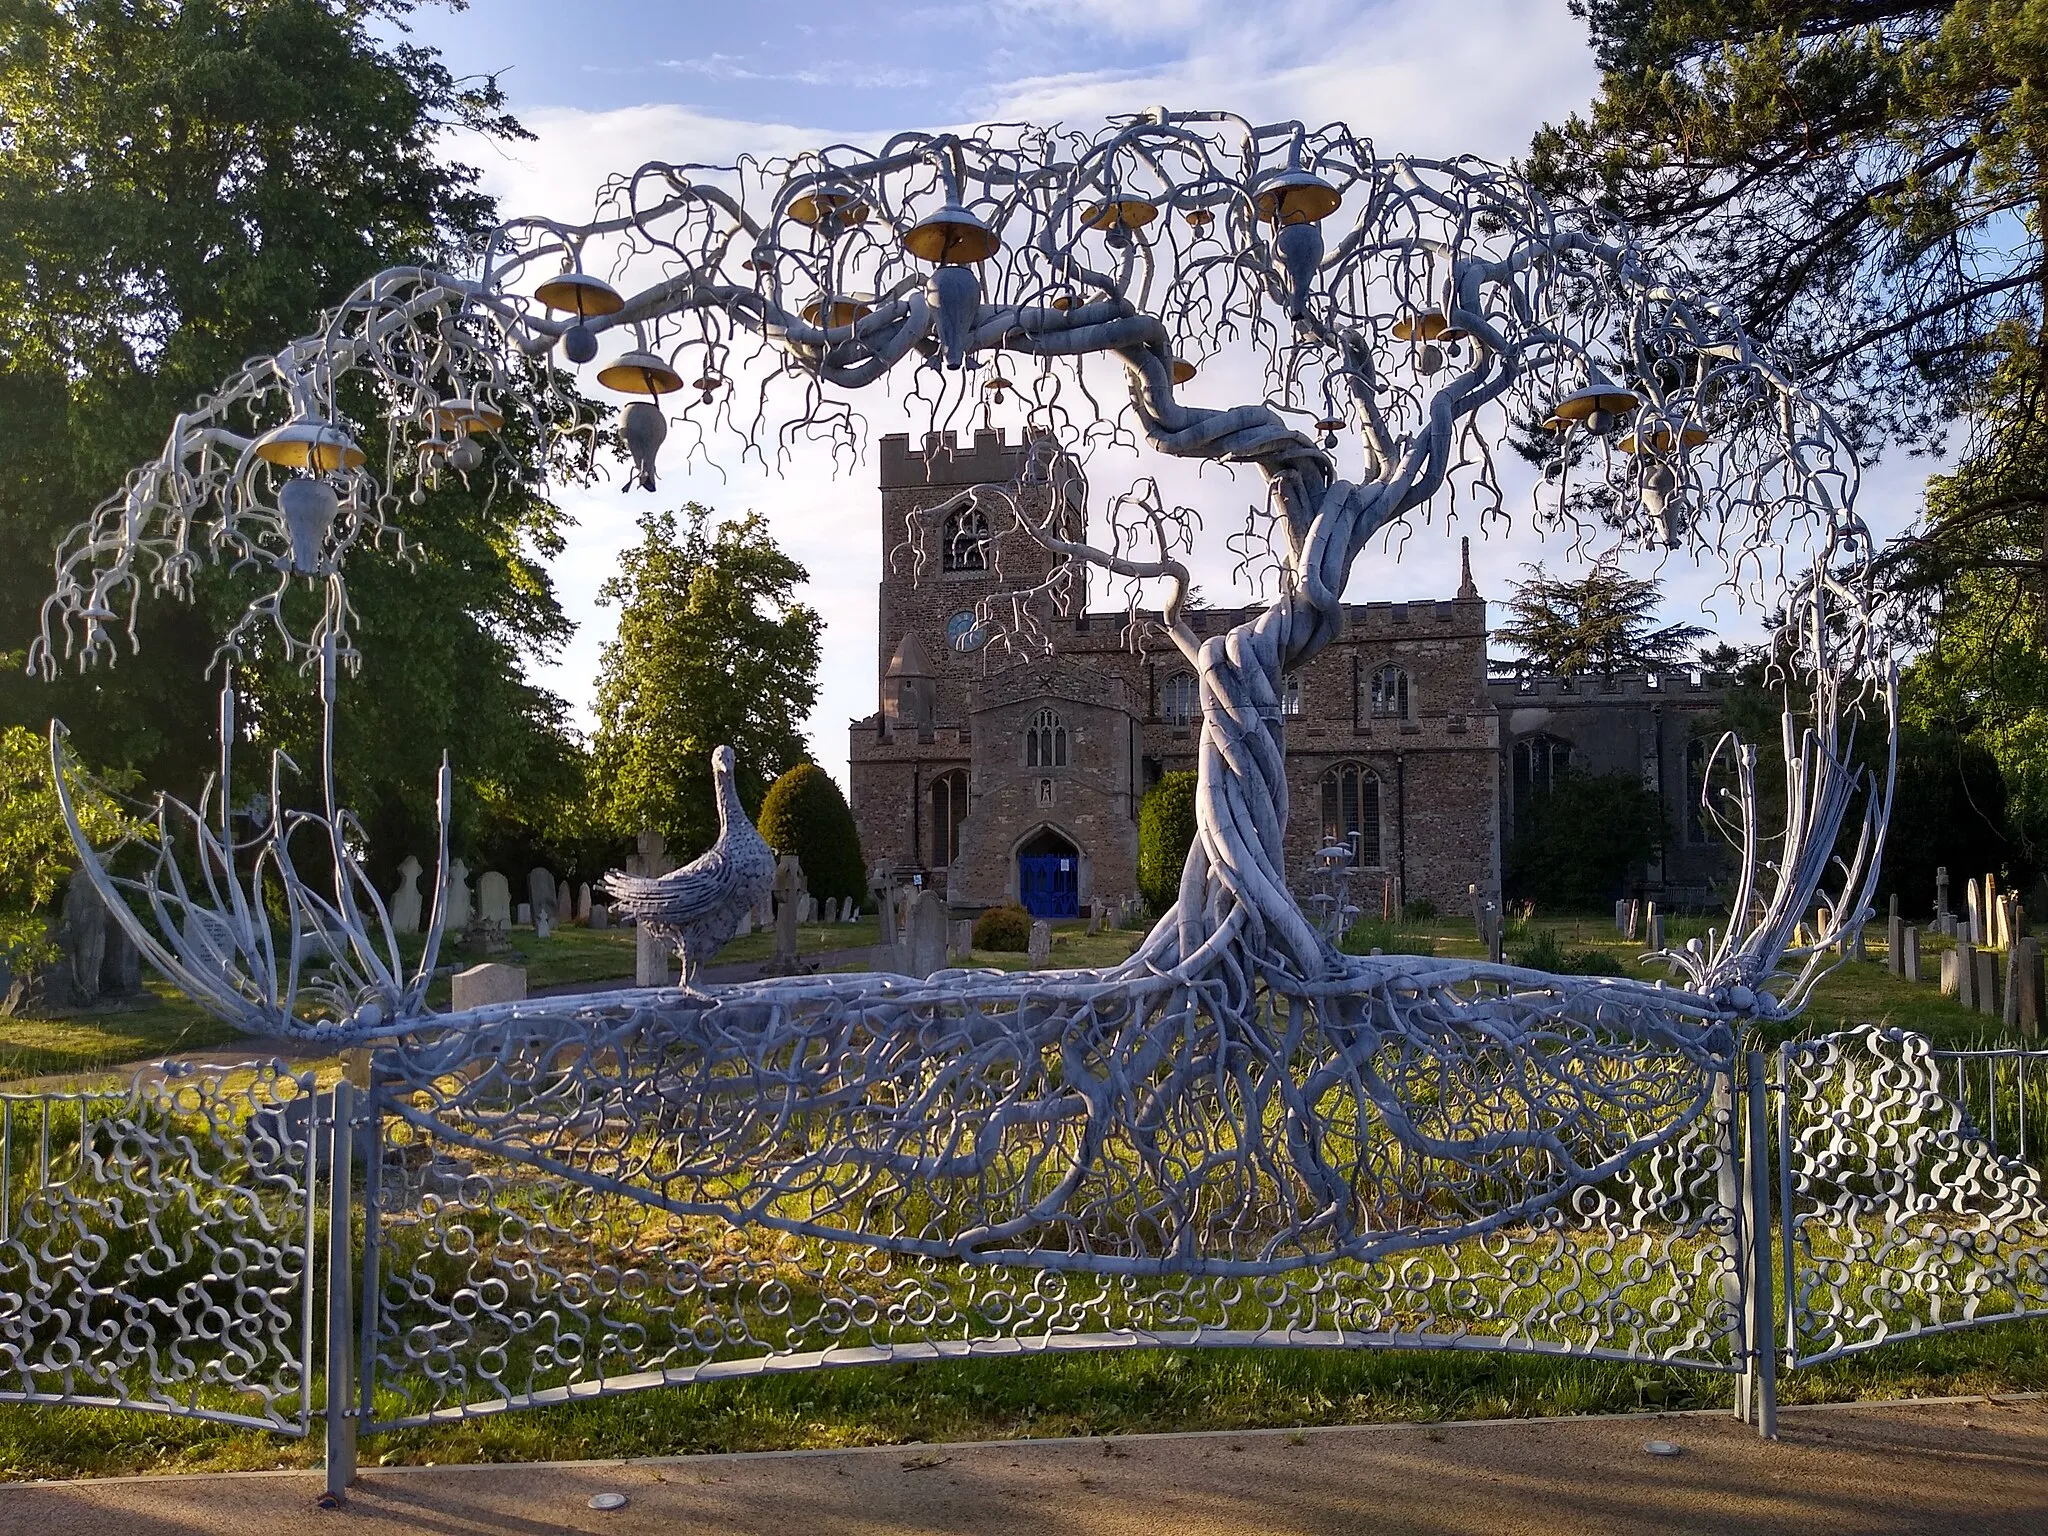 Photo showing: The Golden Goose Sculpture Railings by Matthew Lane Sanderson in front of the St Andrew’s Church in Girton, Cambridgeshire.